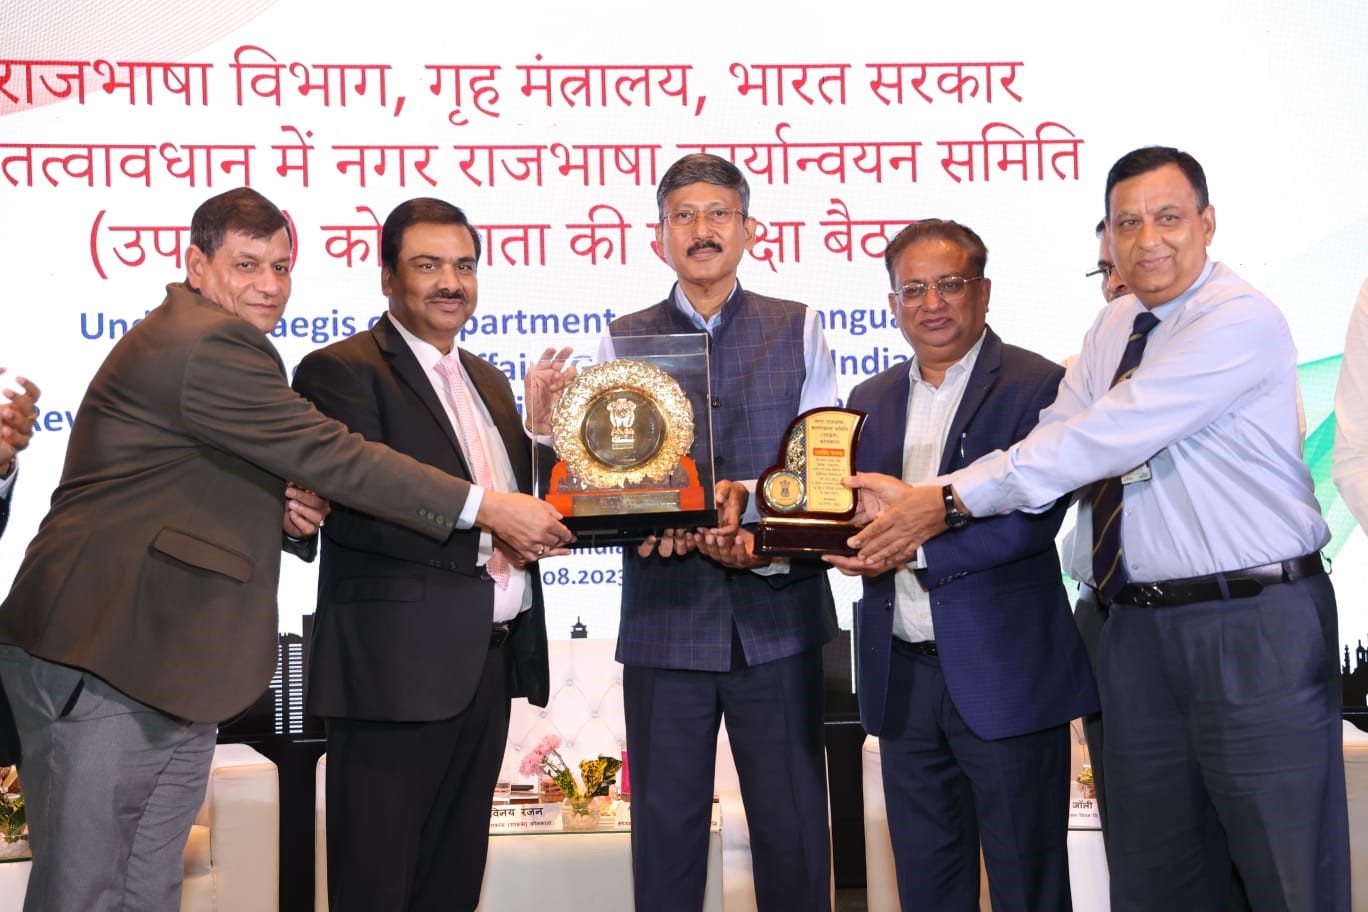 Image 1 - Prestigious Rajbhasha Shield has been awarded to GRSE for the year 2022-23 for Excellence in Implementation of Official Language in the company by Town Official Language Implementation Committee on 25 Aug 23